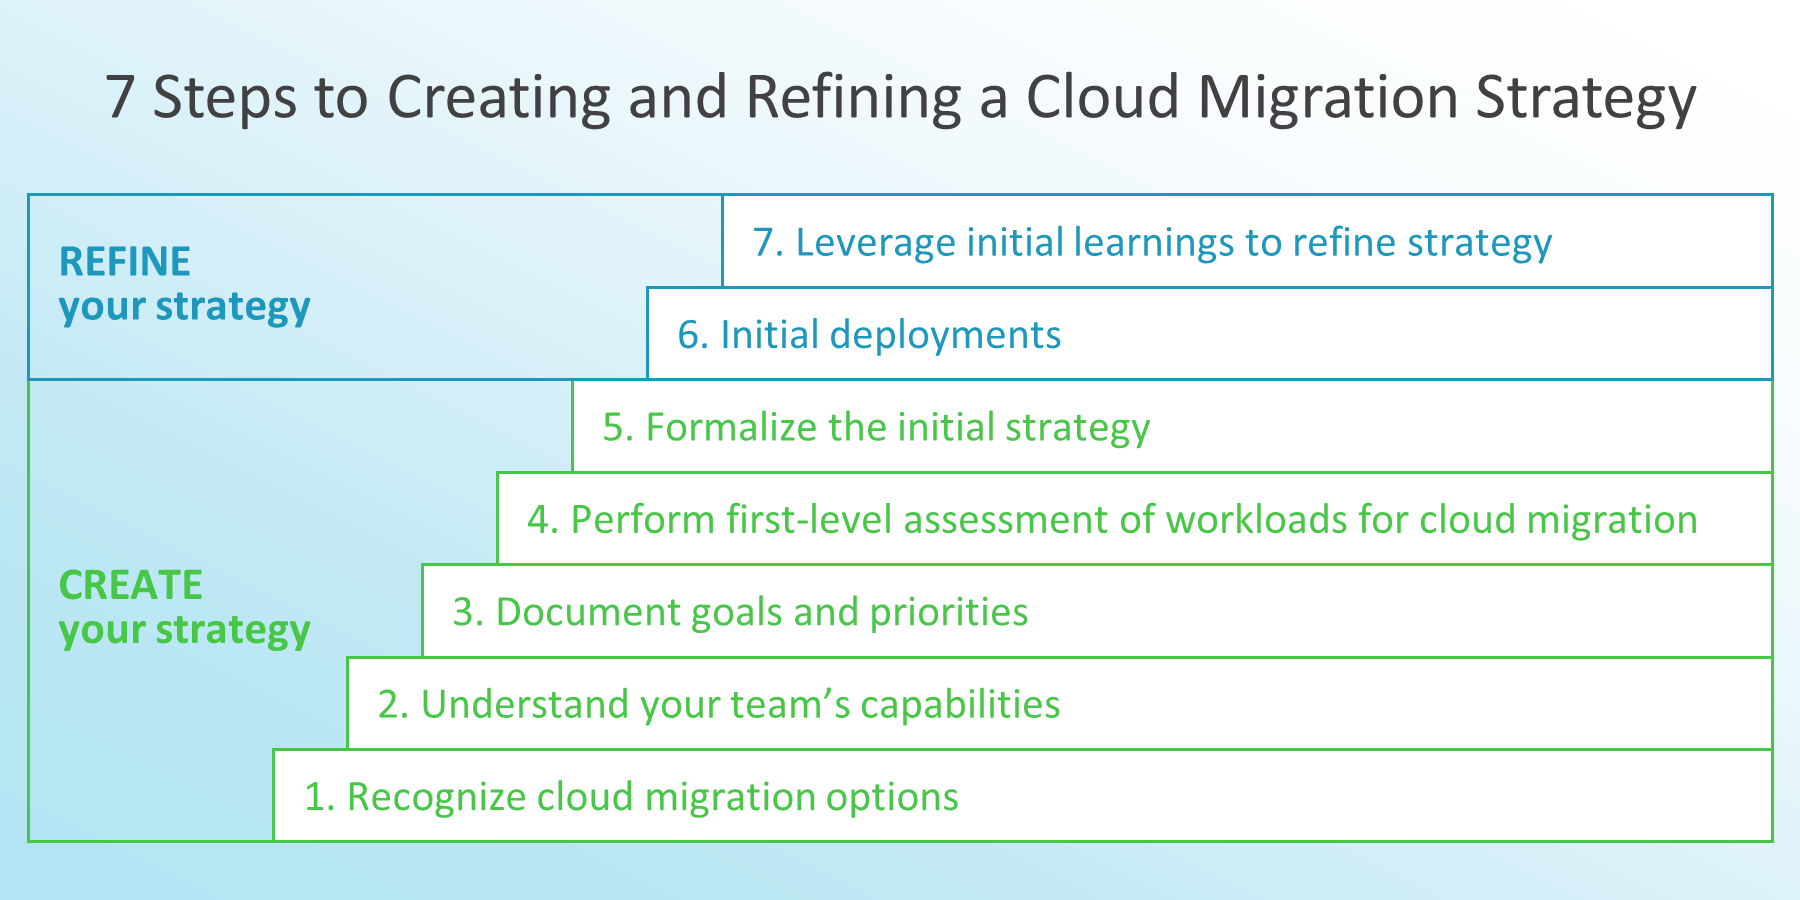 7 Steps to Creating and Refining a Cloud Migration Strategy